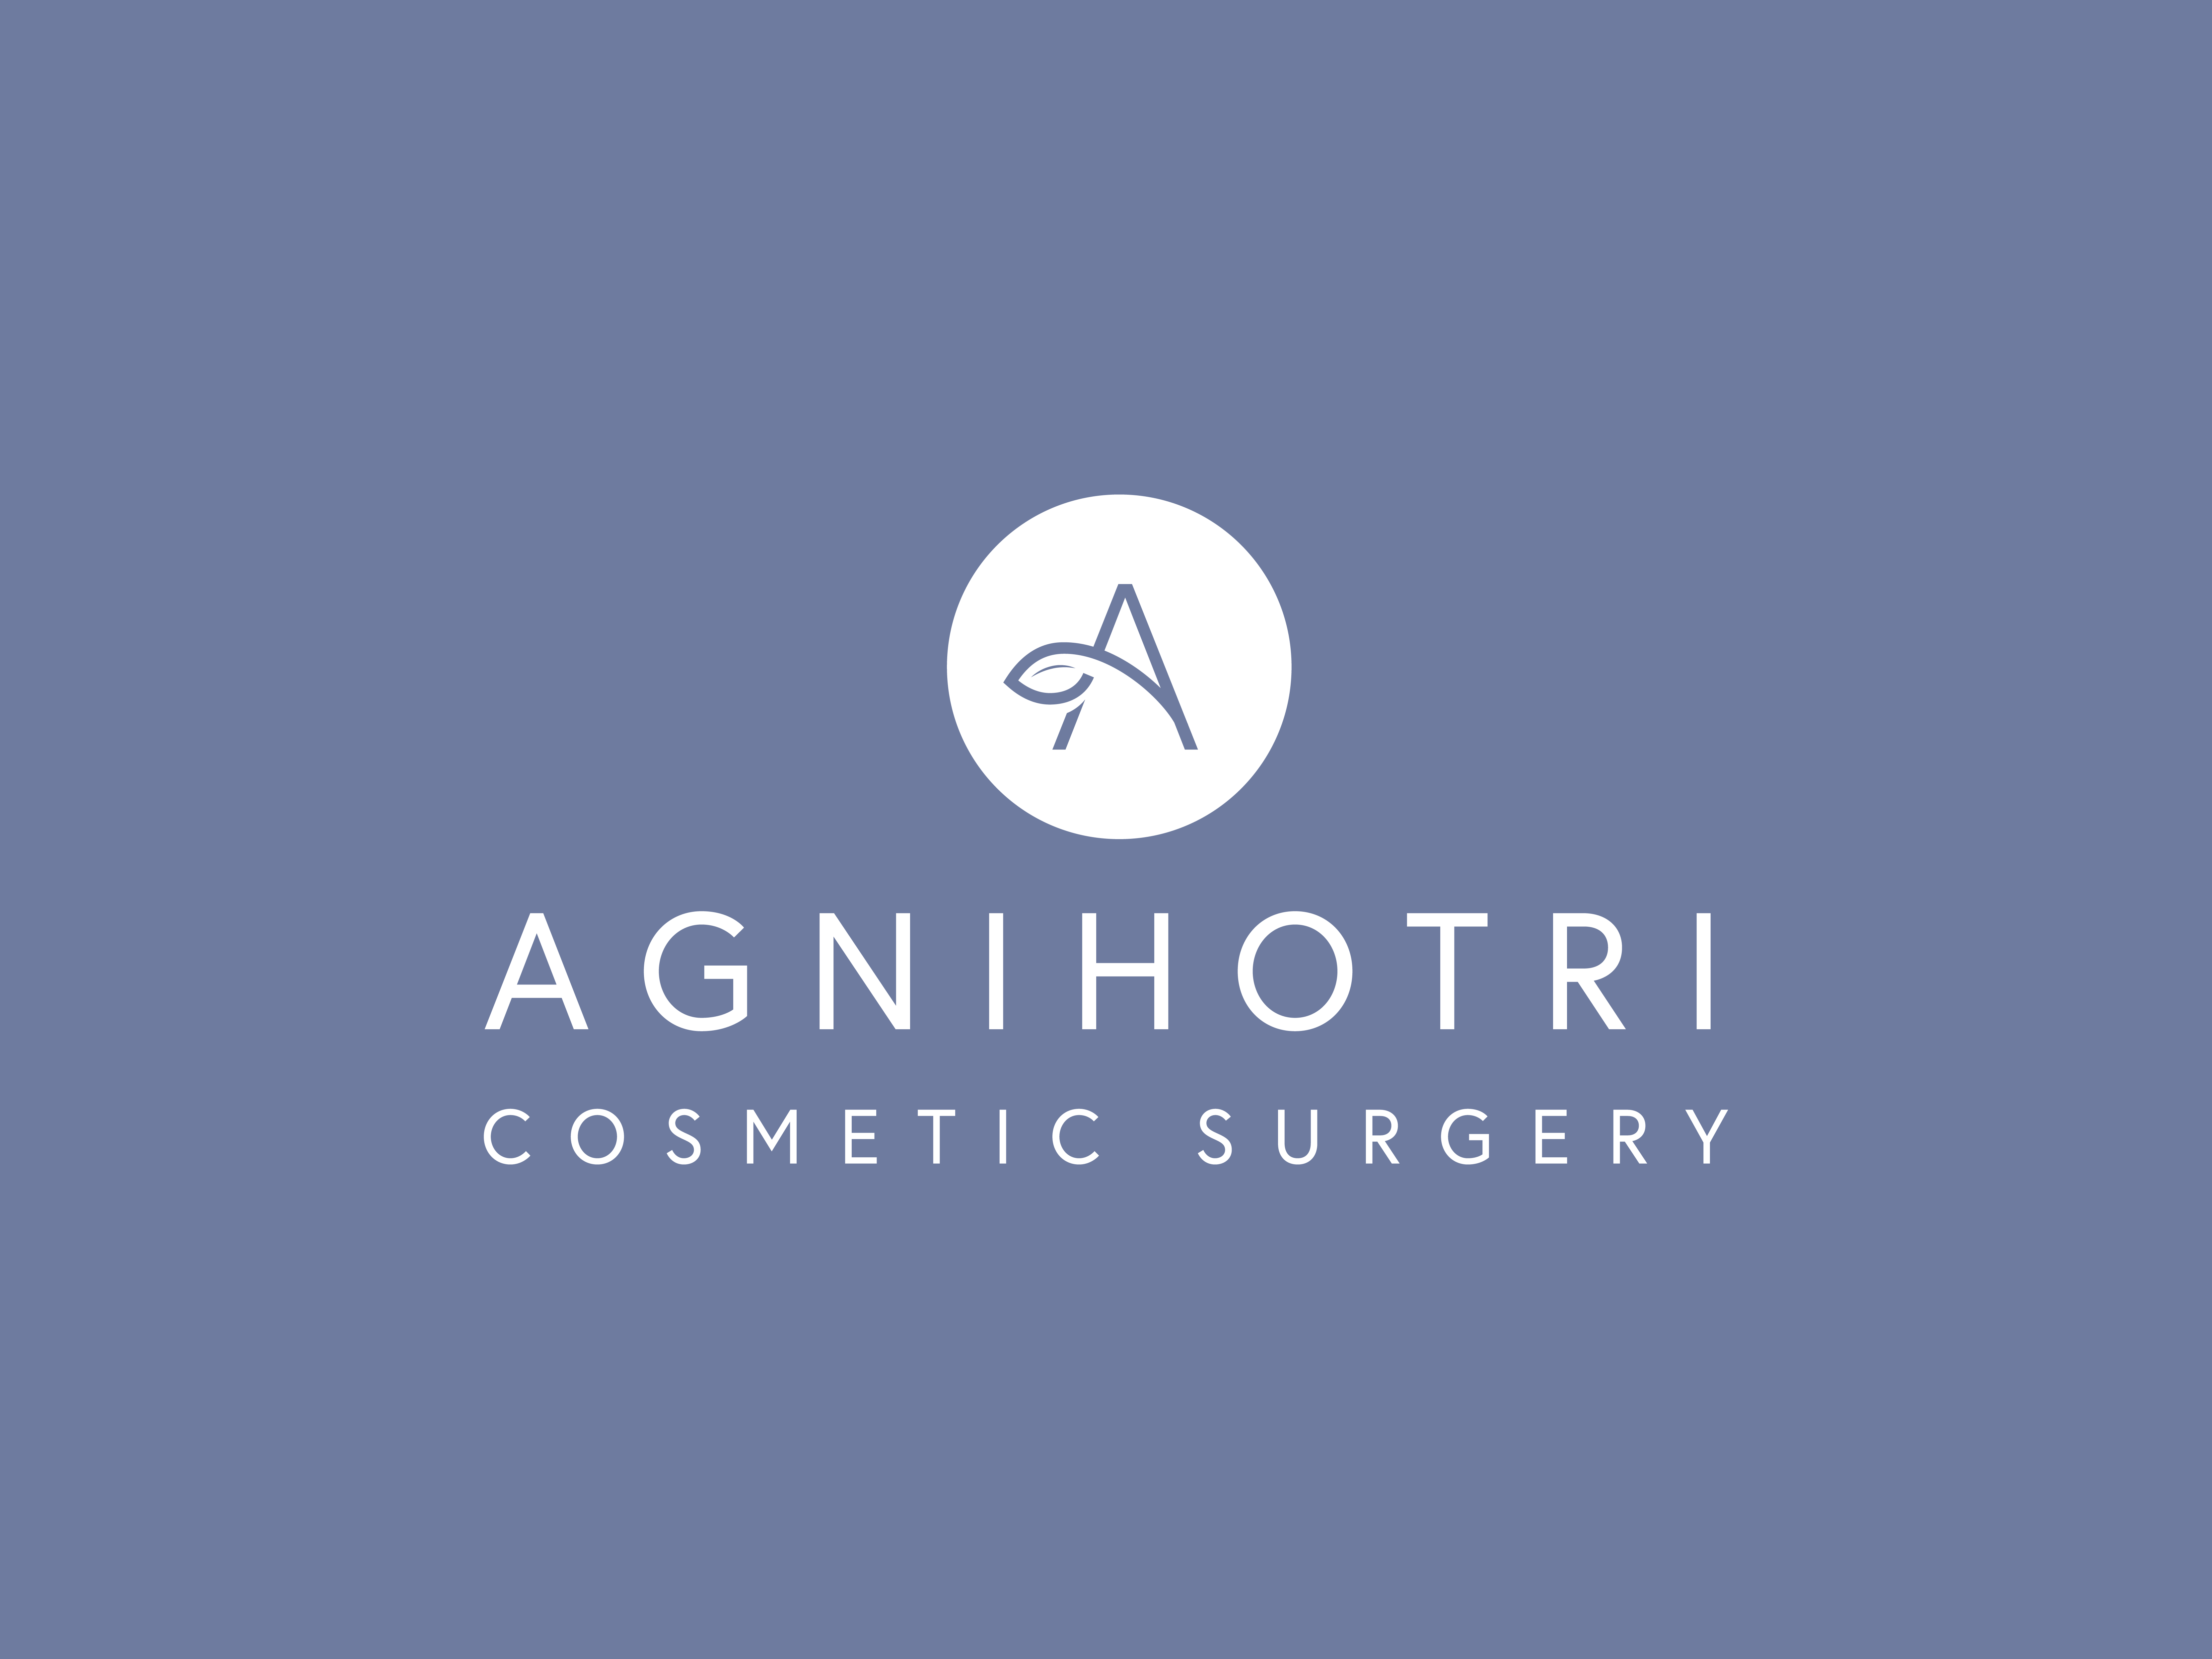 NYC Proctology & Aesthetic Services | Bespoke Surgical